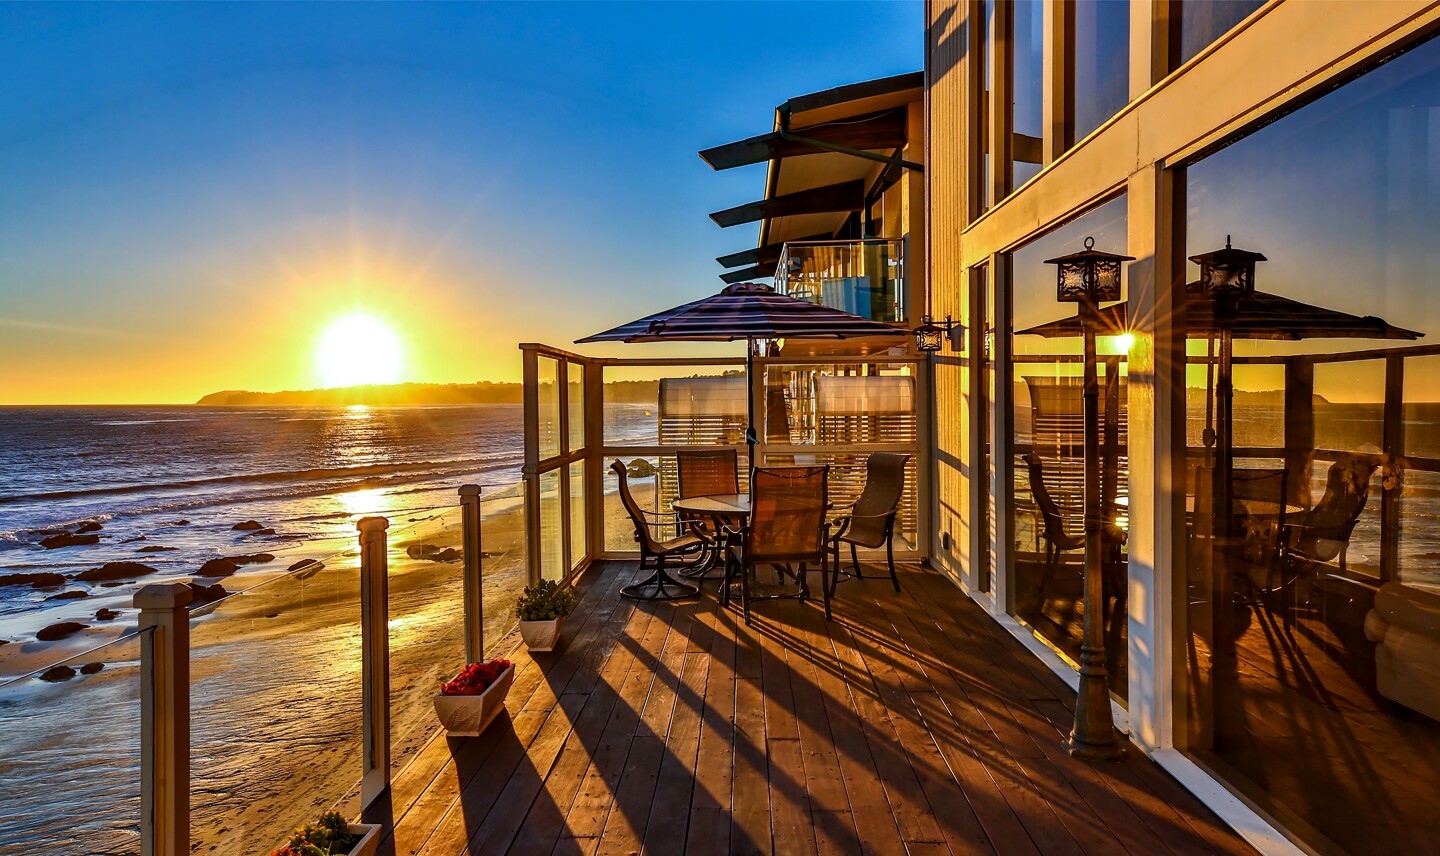 Barry Williams of "The Brady Bunch" fame has sold his home in the Malibu Cove Colony community for $5.82 million. The oceanfront spread features a two-story living room, a rock fireplace and walls of windows that take in the surf.